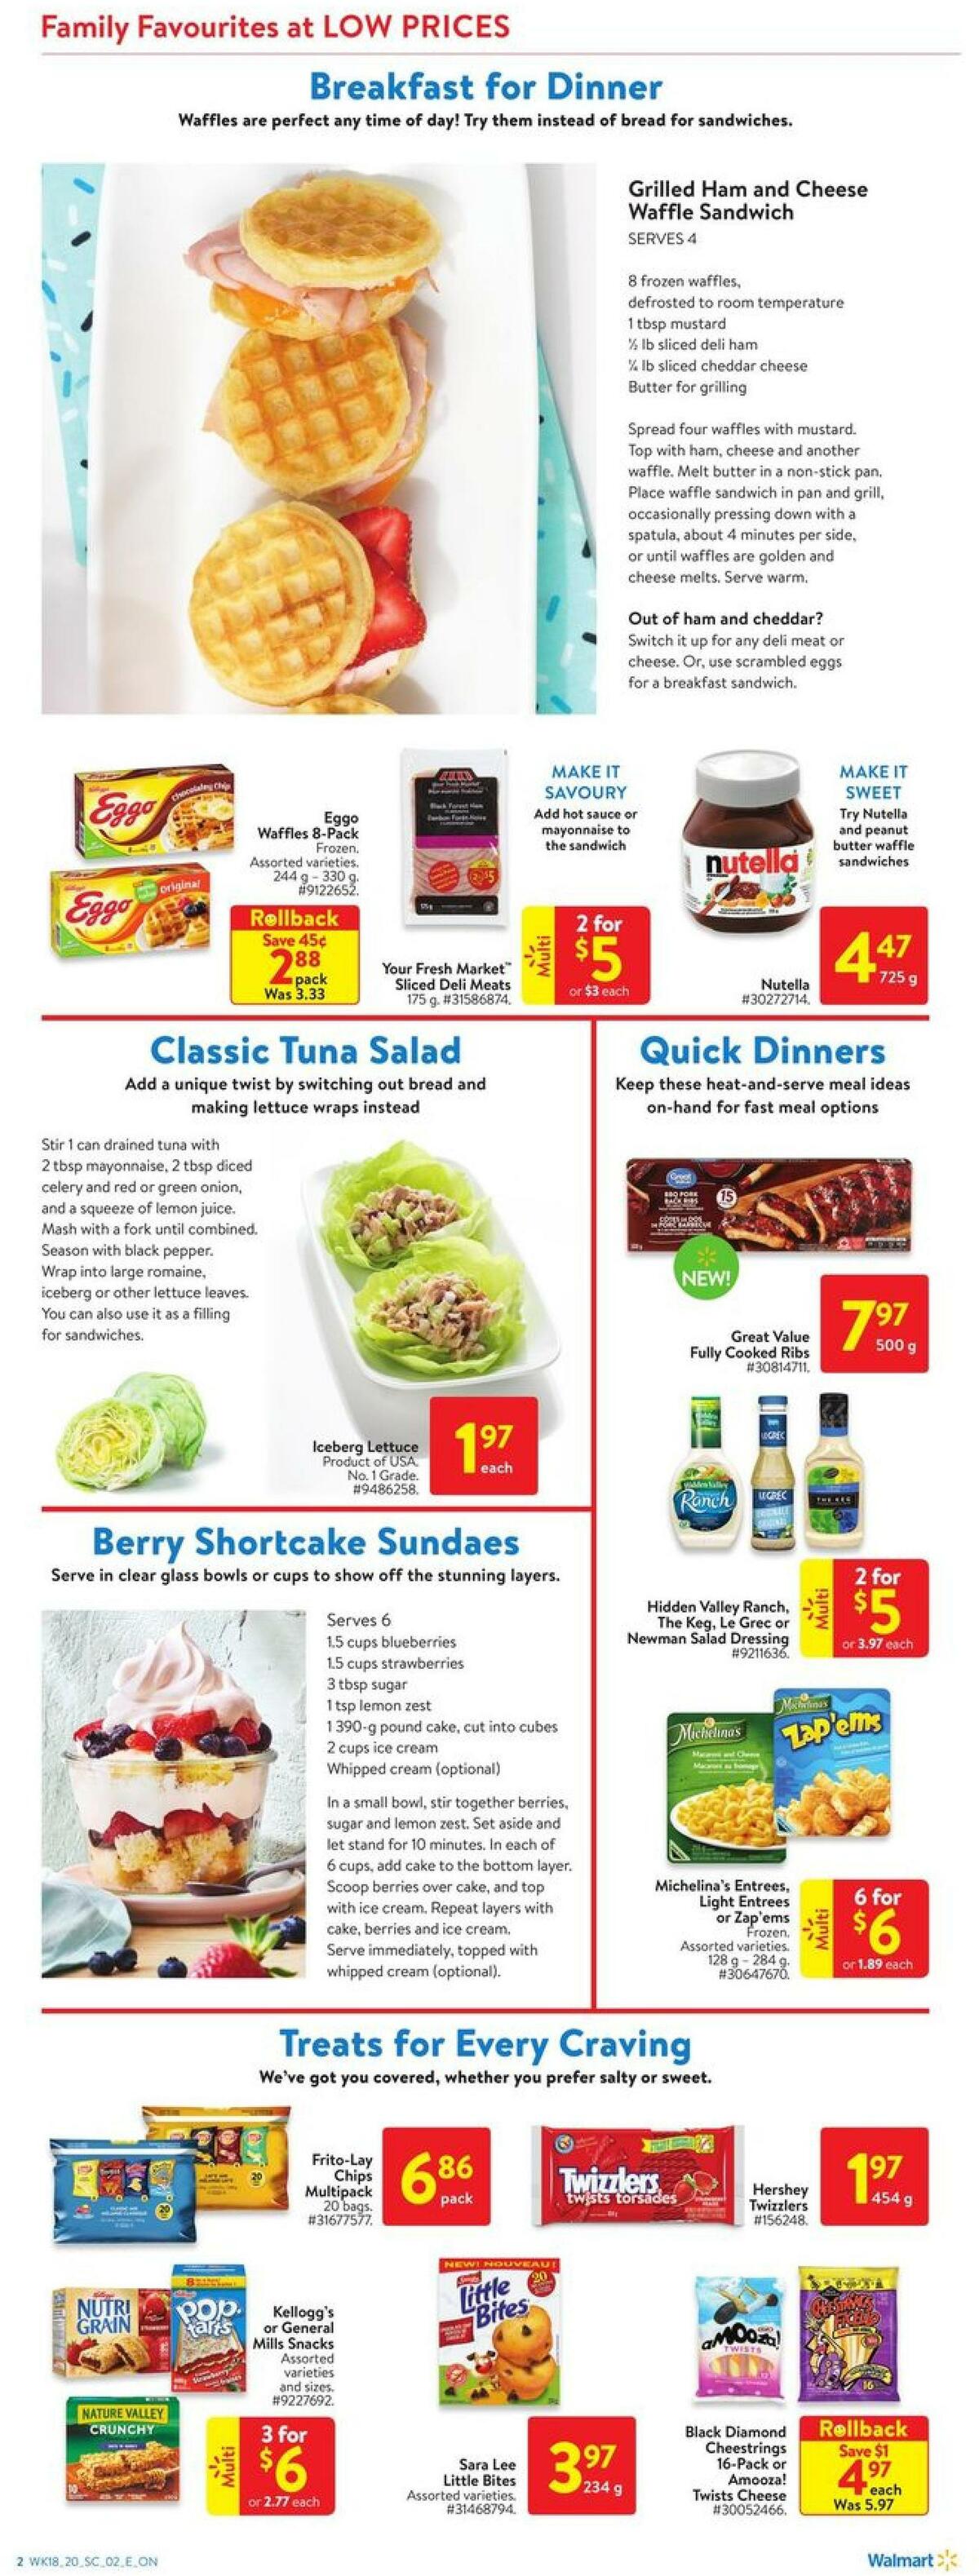 Walmart Flyer from May 28